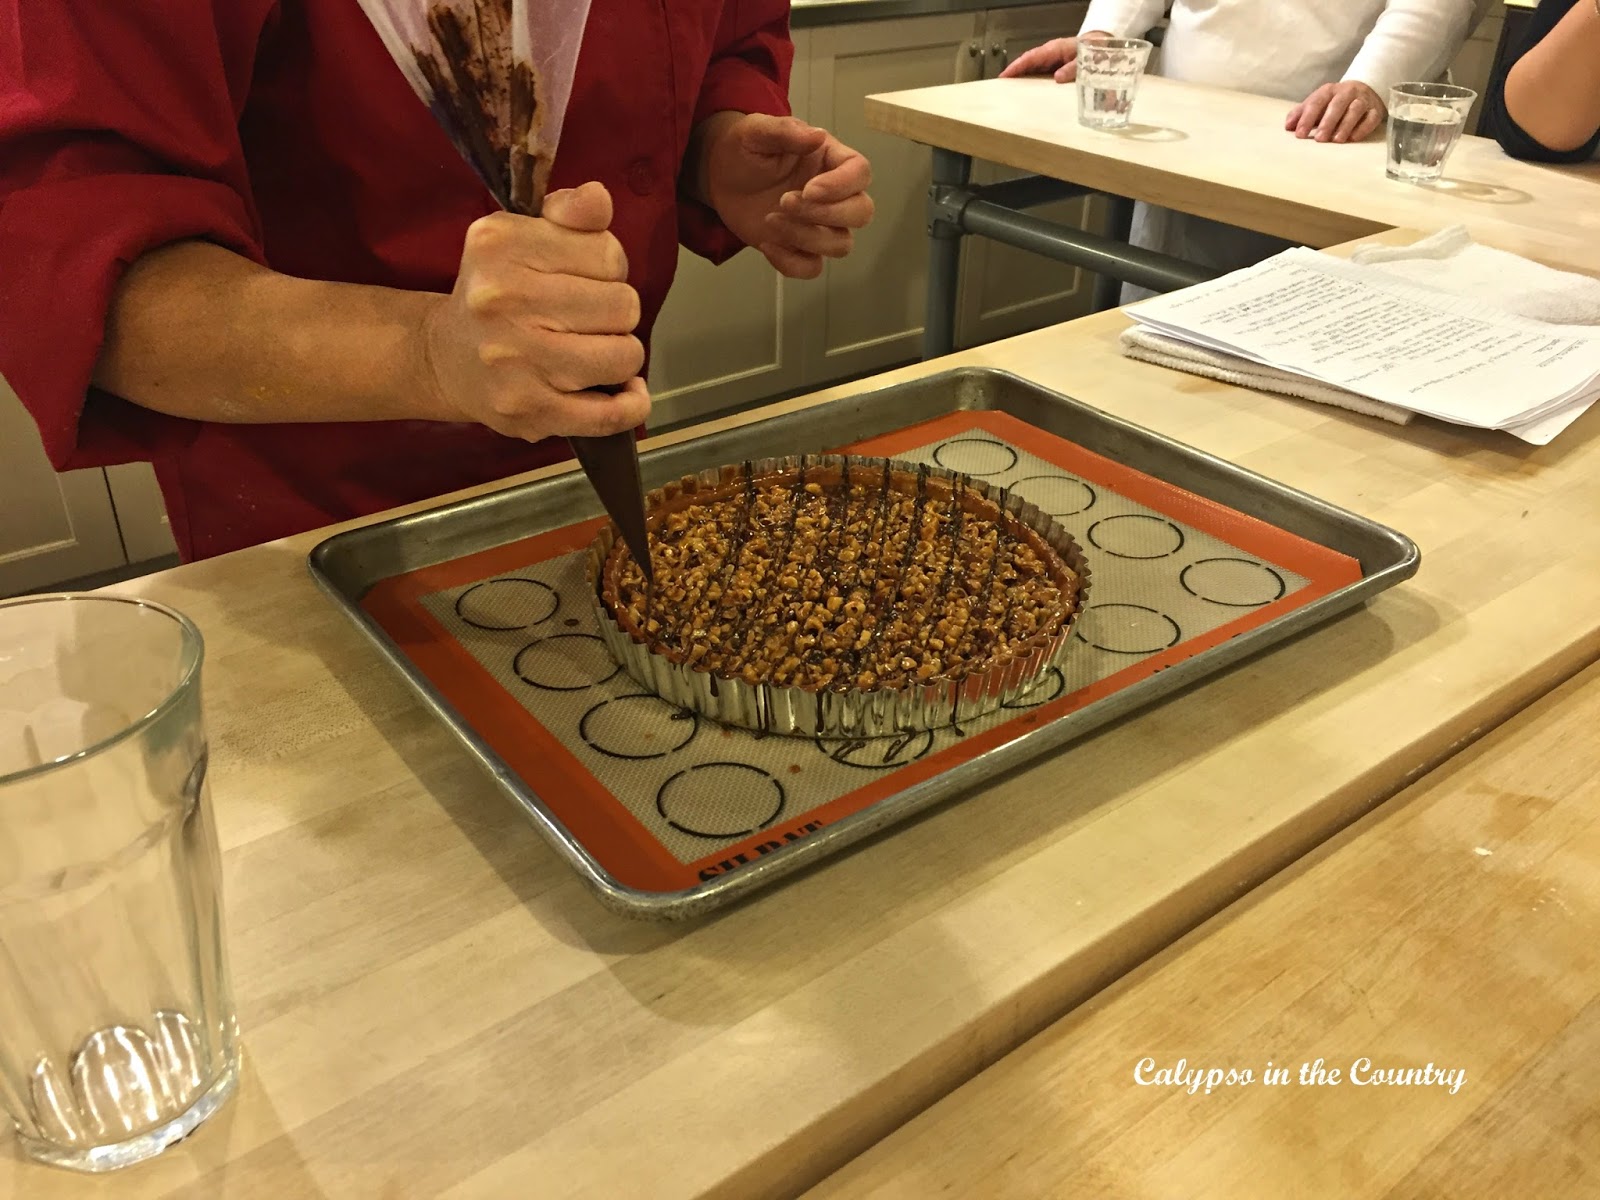 Chocolate Caramel Tart from a cooking class - creative Valentine gift idea